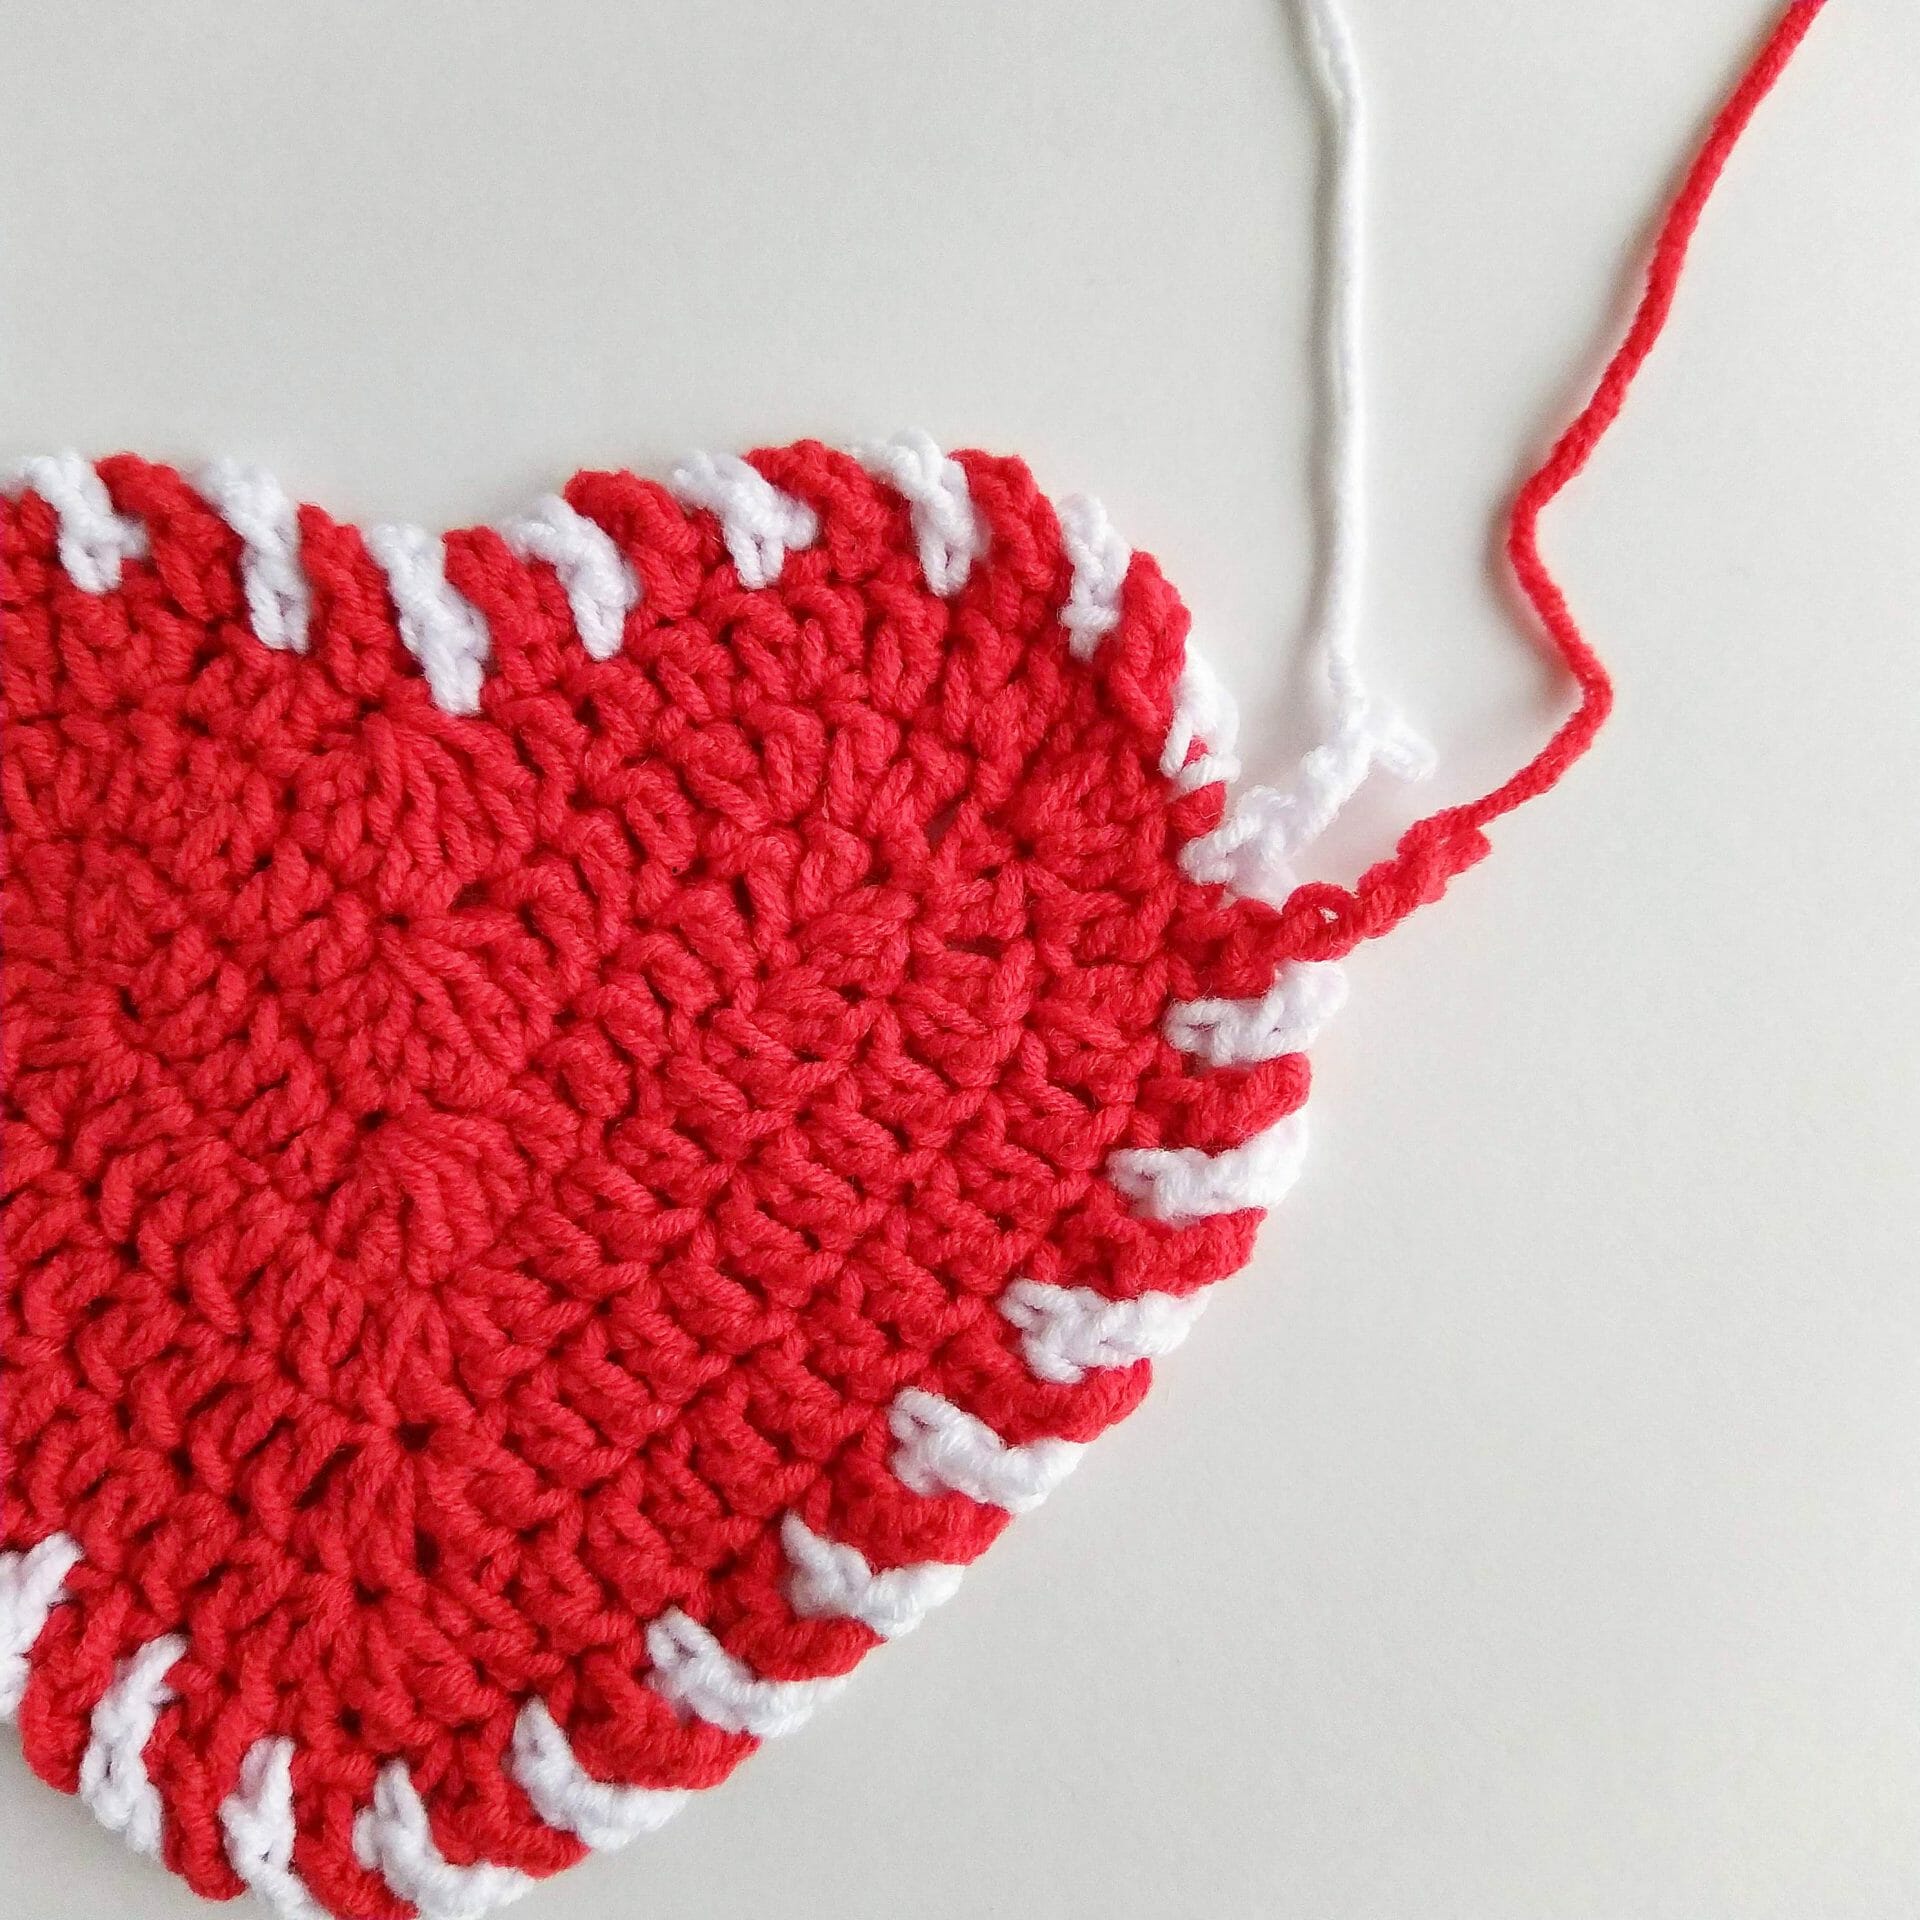 • Crochet heart coaster patterns for beginners • Listing includes: step by step instructions, photos of the process and diagram • Yarn: Sport, Baby, DK medium worsted (#2, #3) • Crochet hook: D/3 – E/4 (US) / 3 - 3.5 mm (EU) • Tutorial contains US and UK crocheting terms • Level: beginners